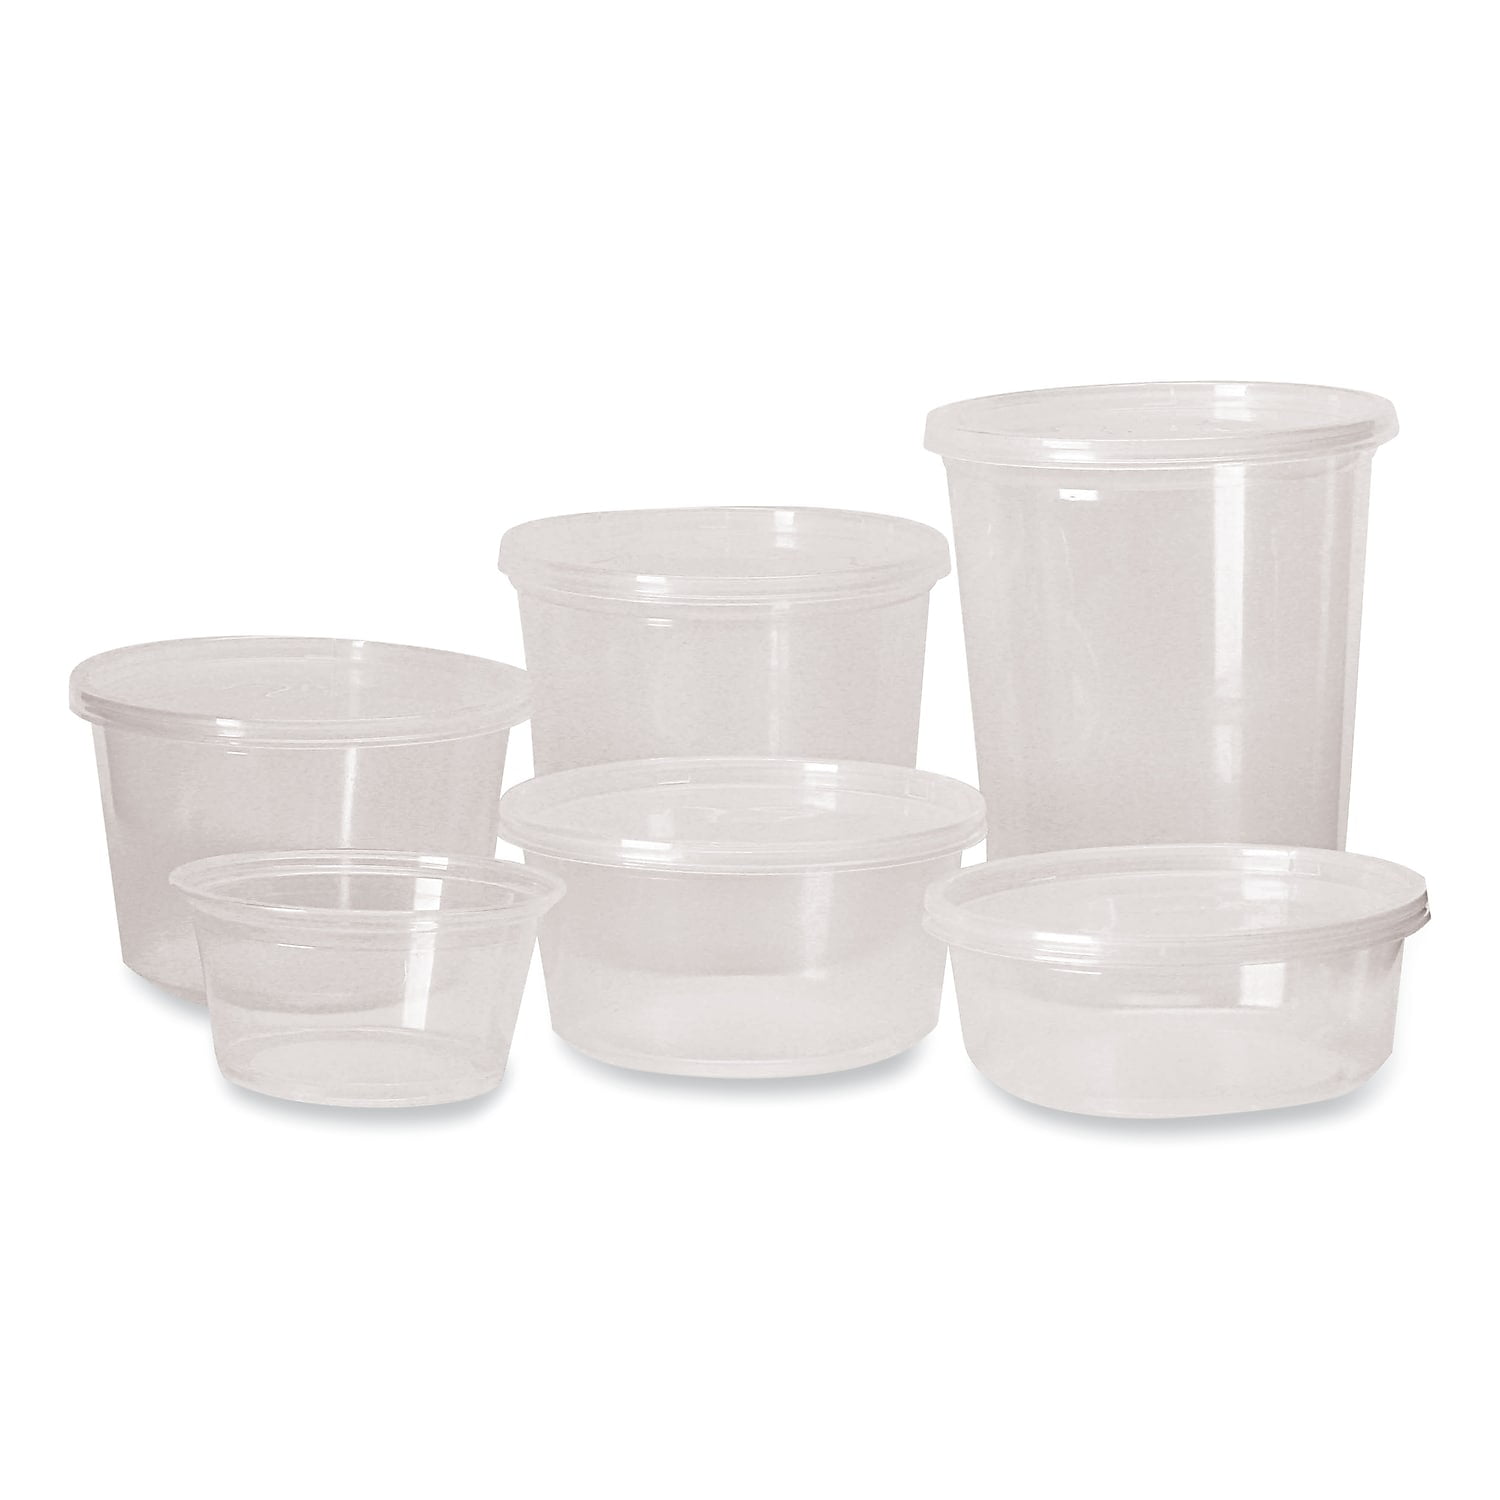 Microwavable Deli Containers by Fabri-Kal® FABPK16SC